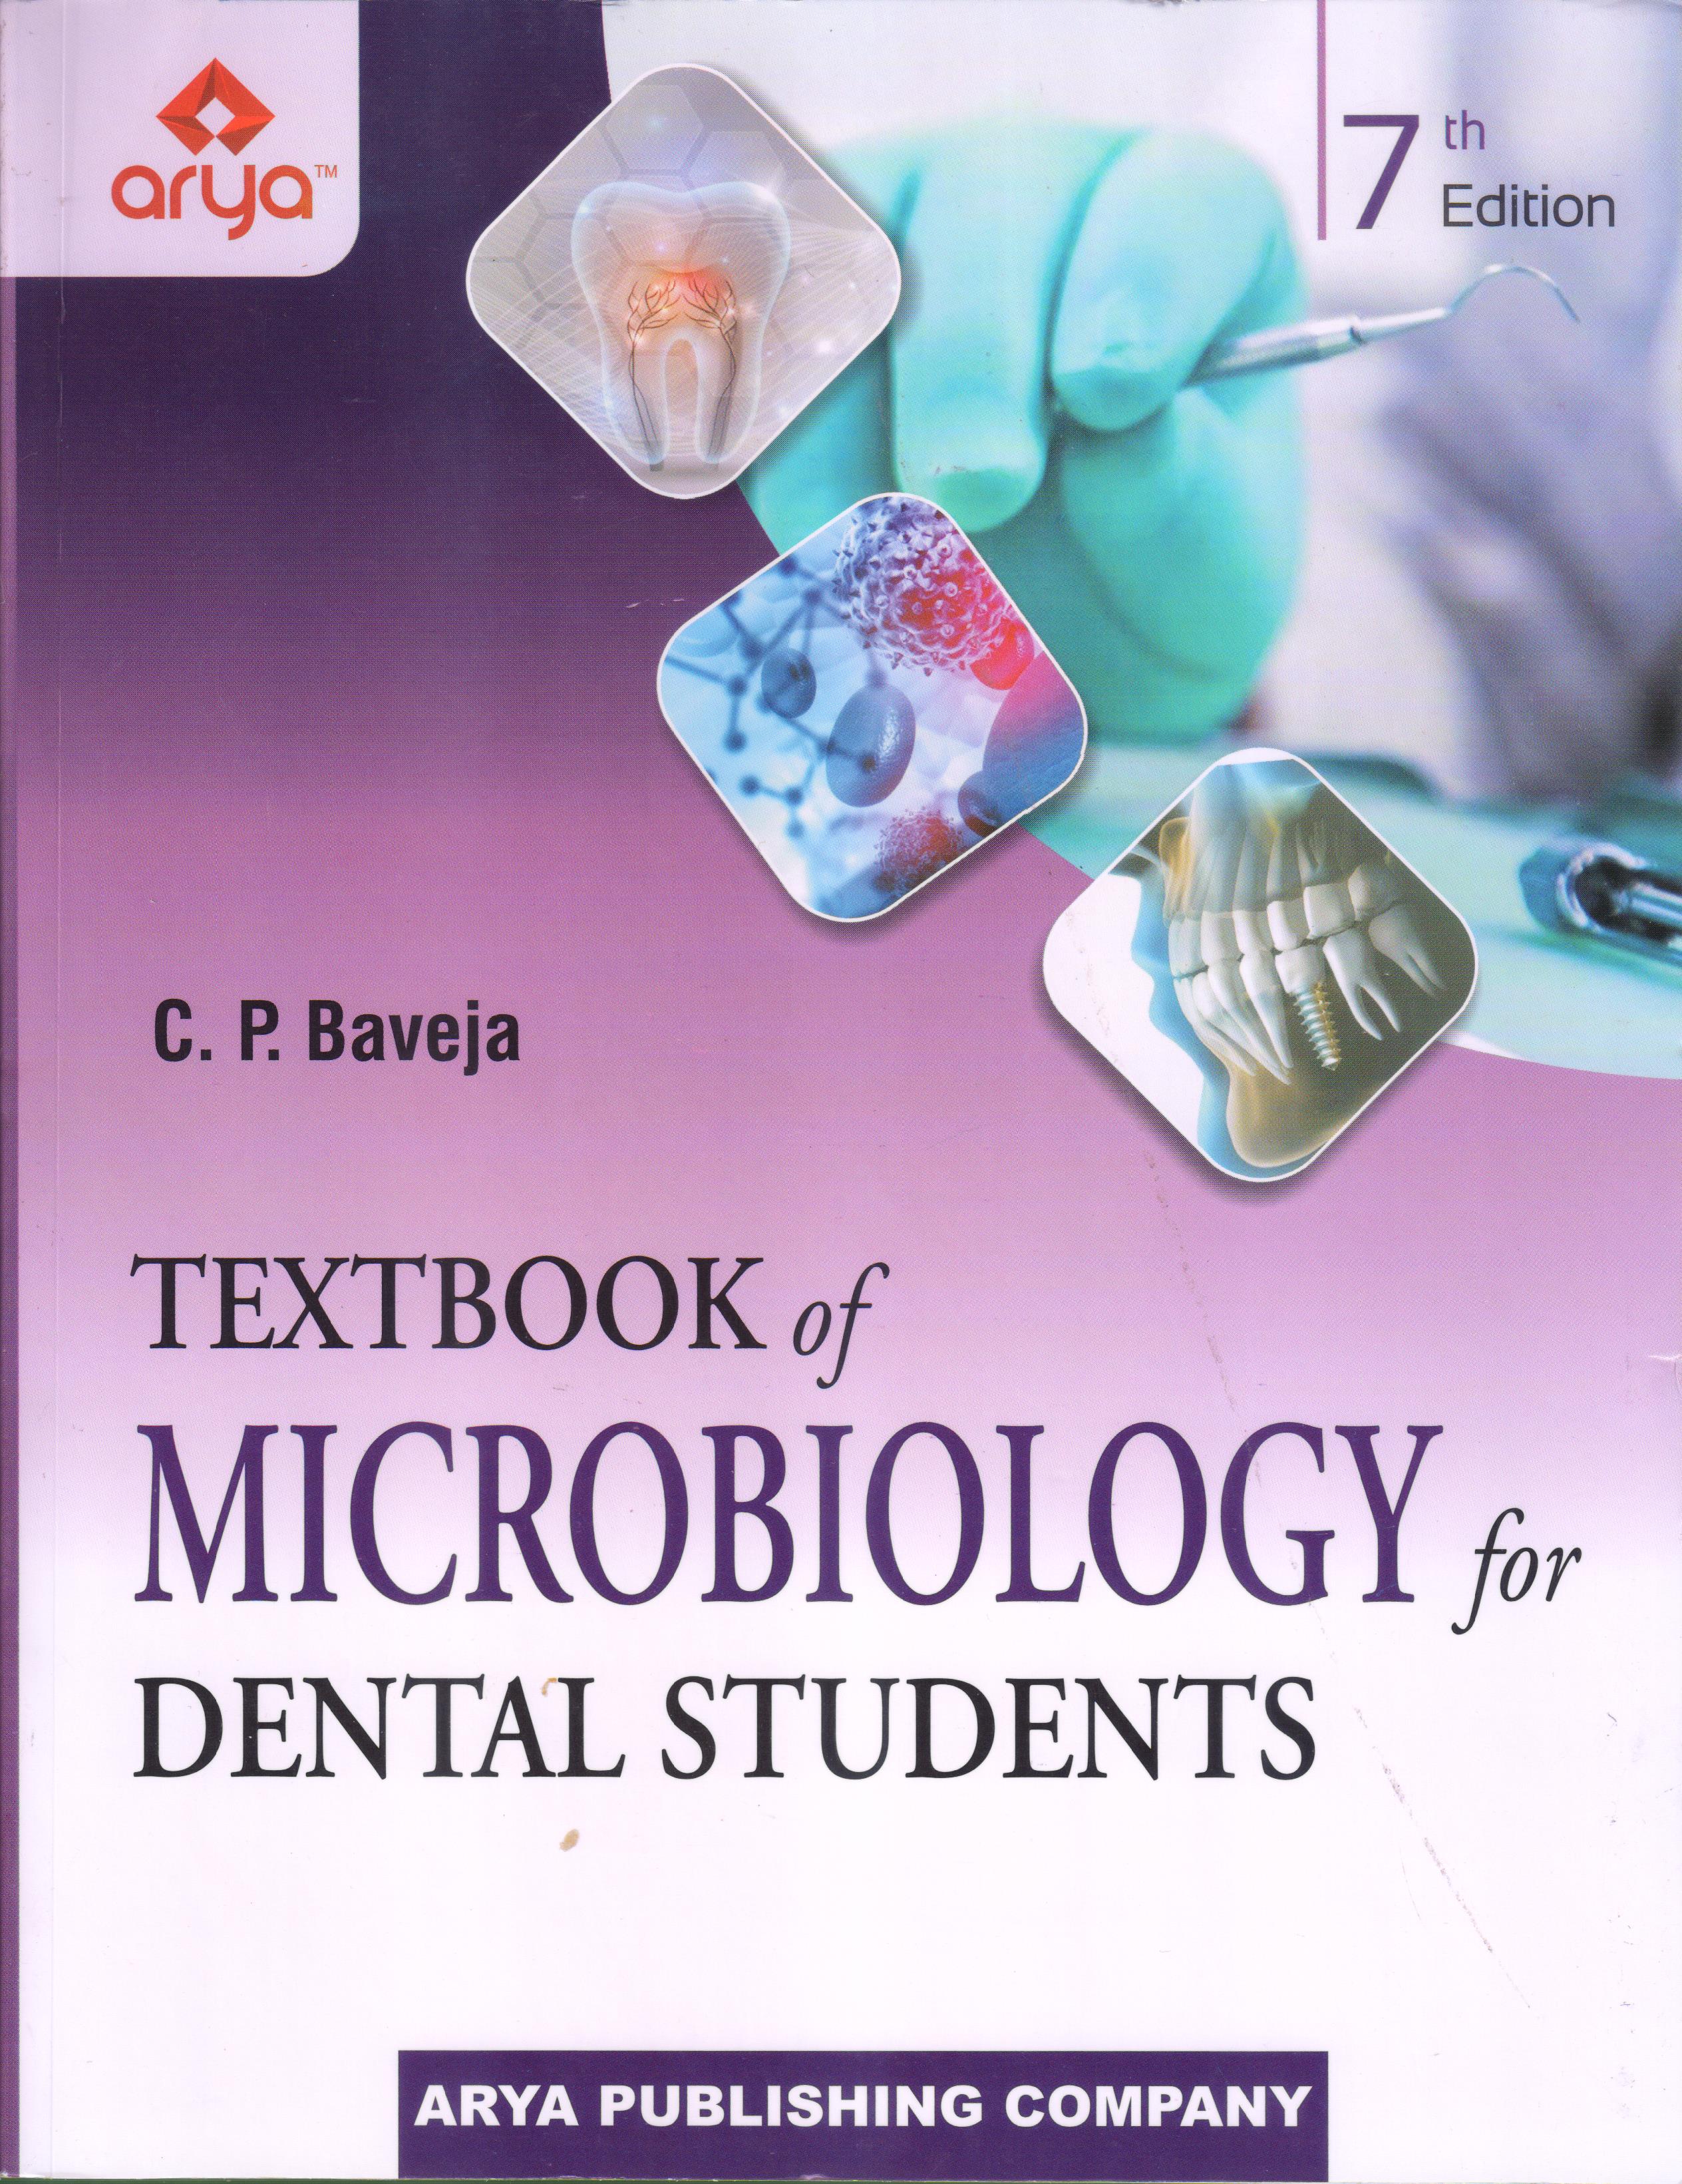 Textbook of Microbiology for Dental Students 7th ed